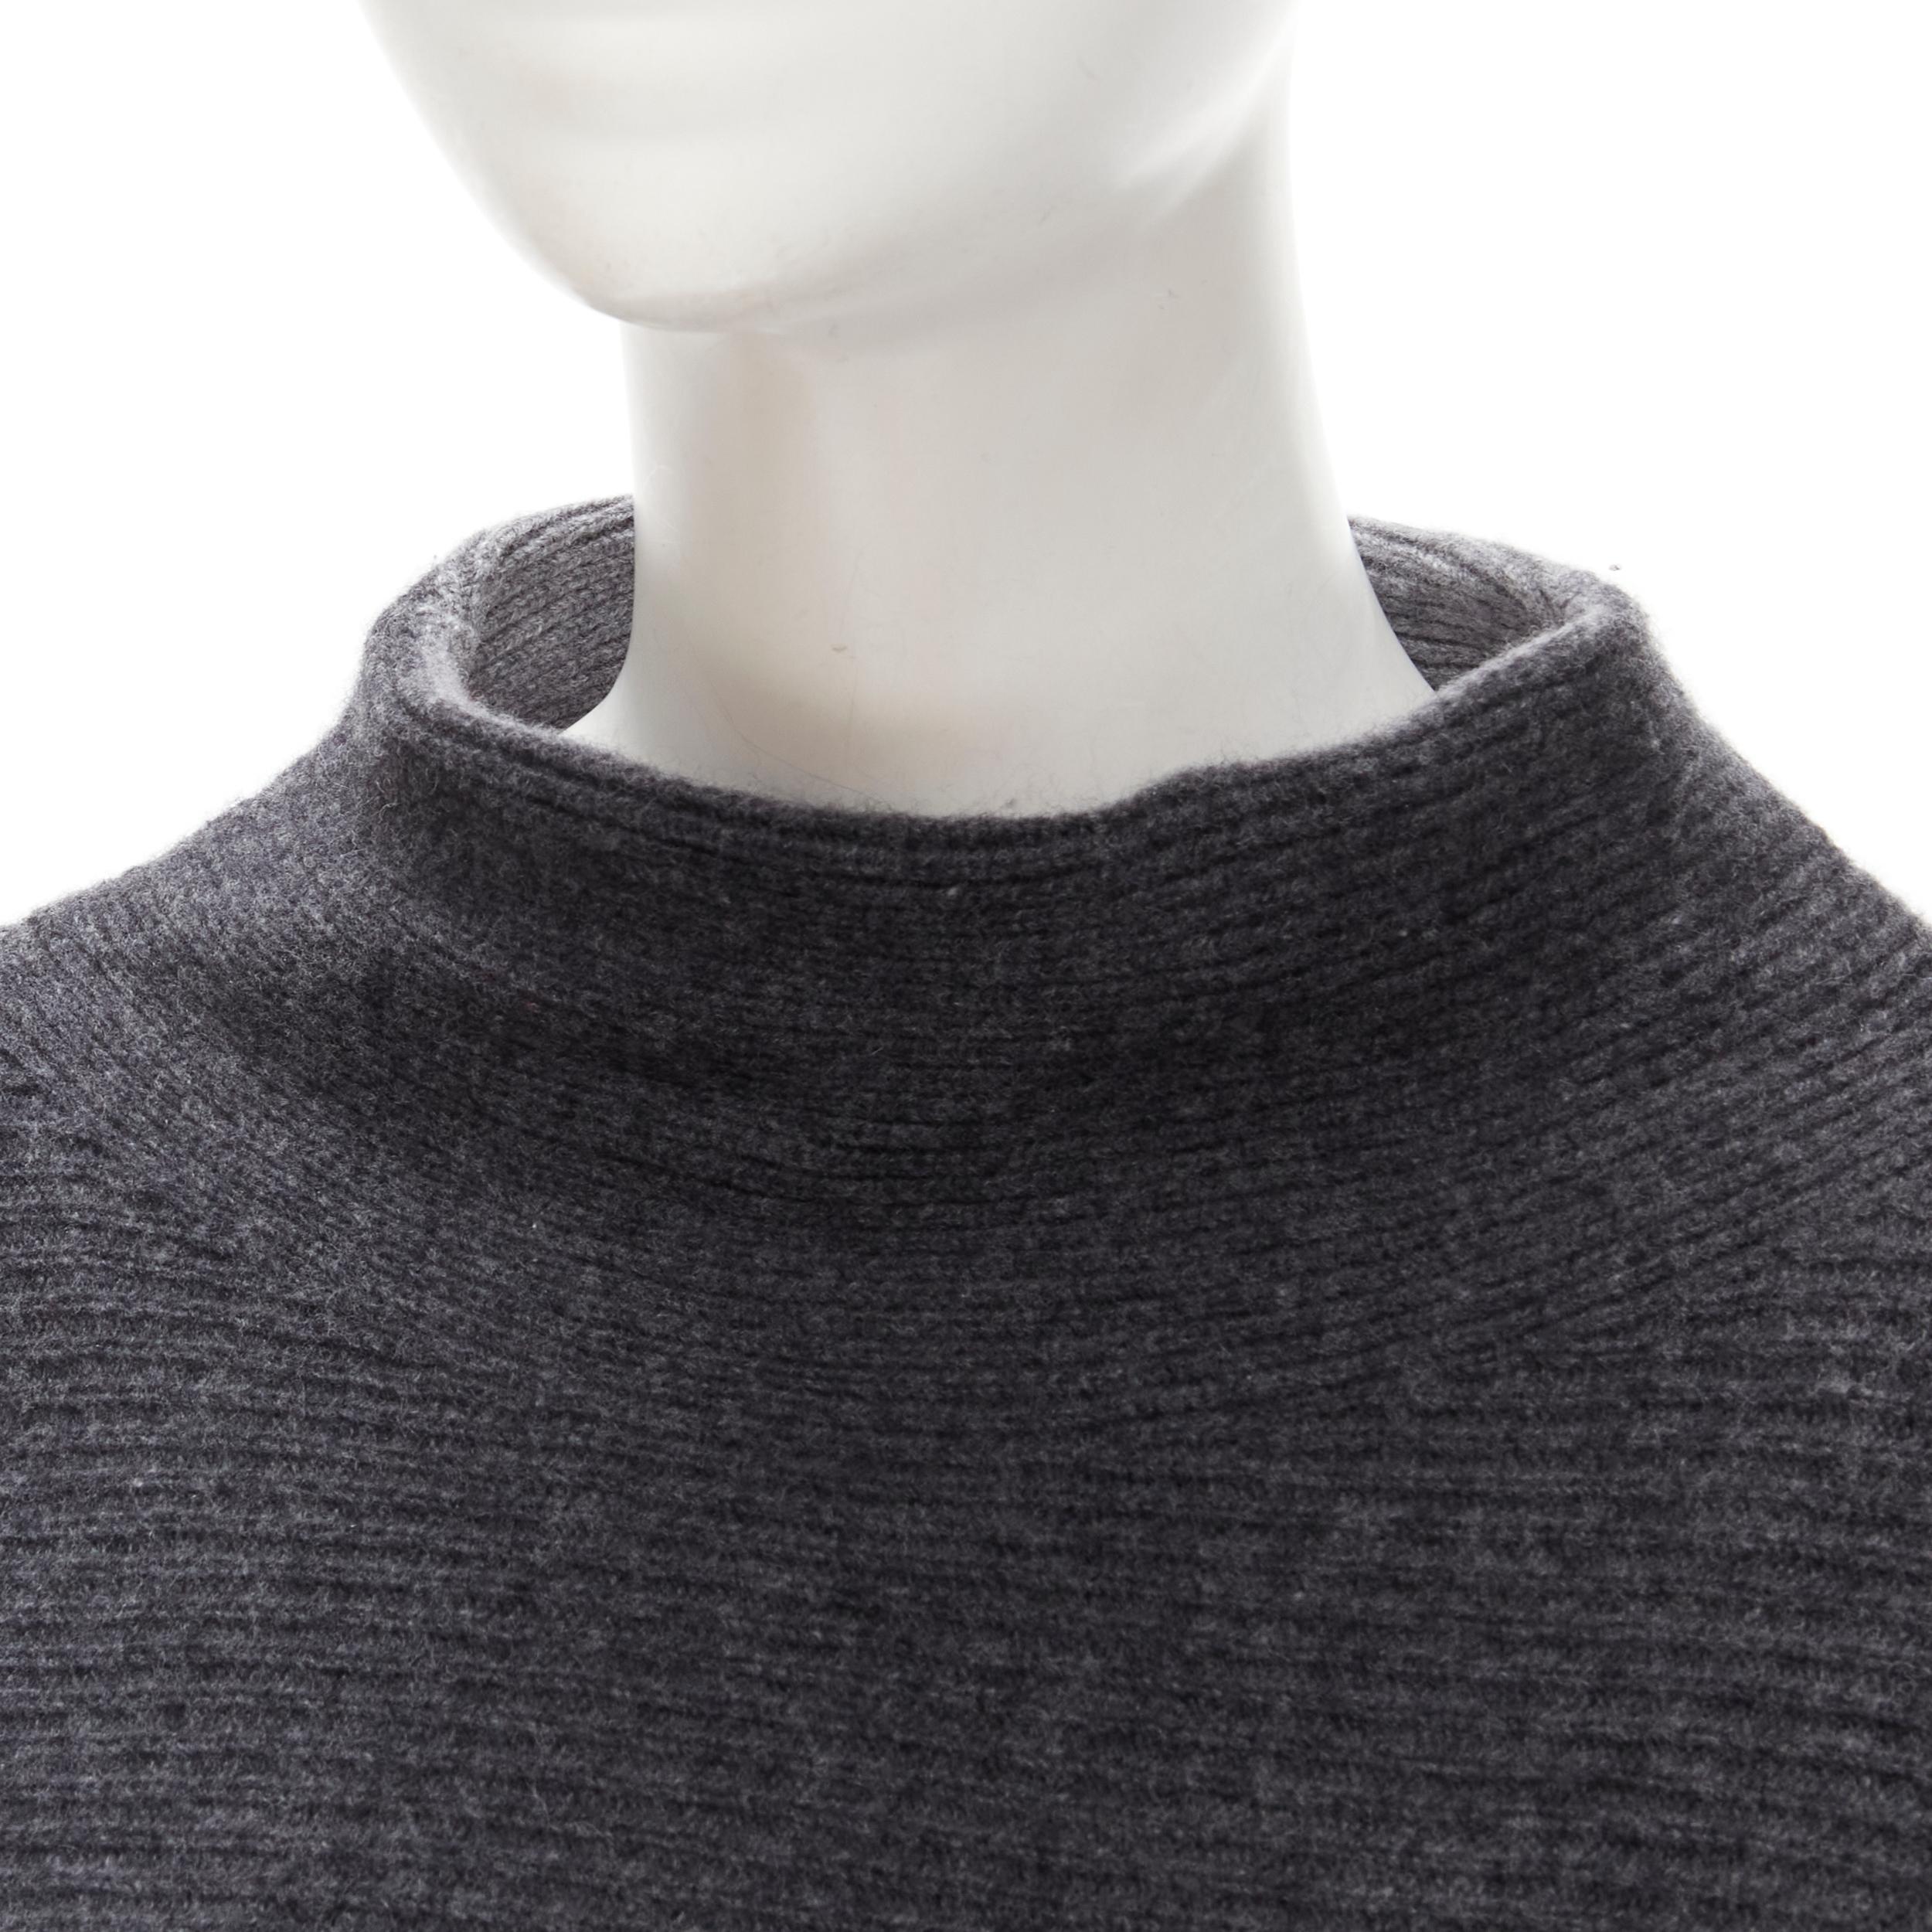 VINCE merino wool cashmere blend ribbed knit mock neck oversized sweater XS
Brand: Vince
Material: Merino Wool
Color: Grey
Pattern: Solid
Made in: China

CONDITION:
Condition: Excellent, this item was pre-owned and is in excellent condition.